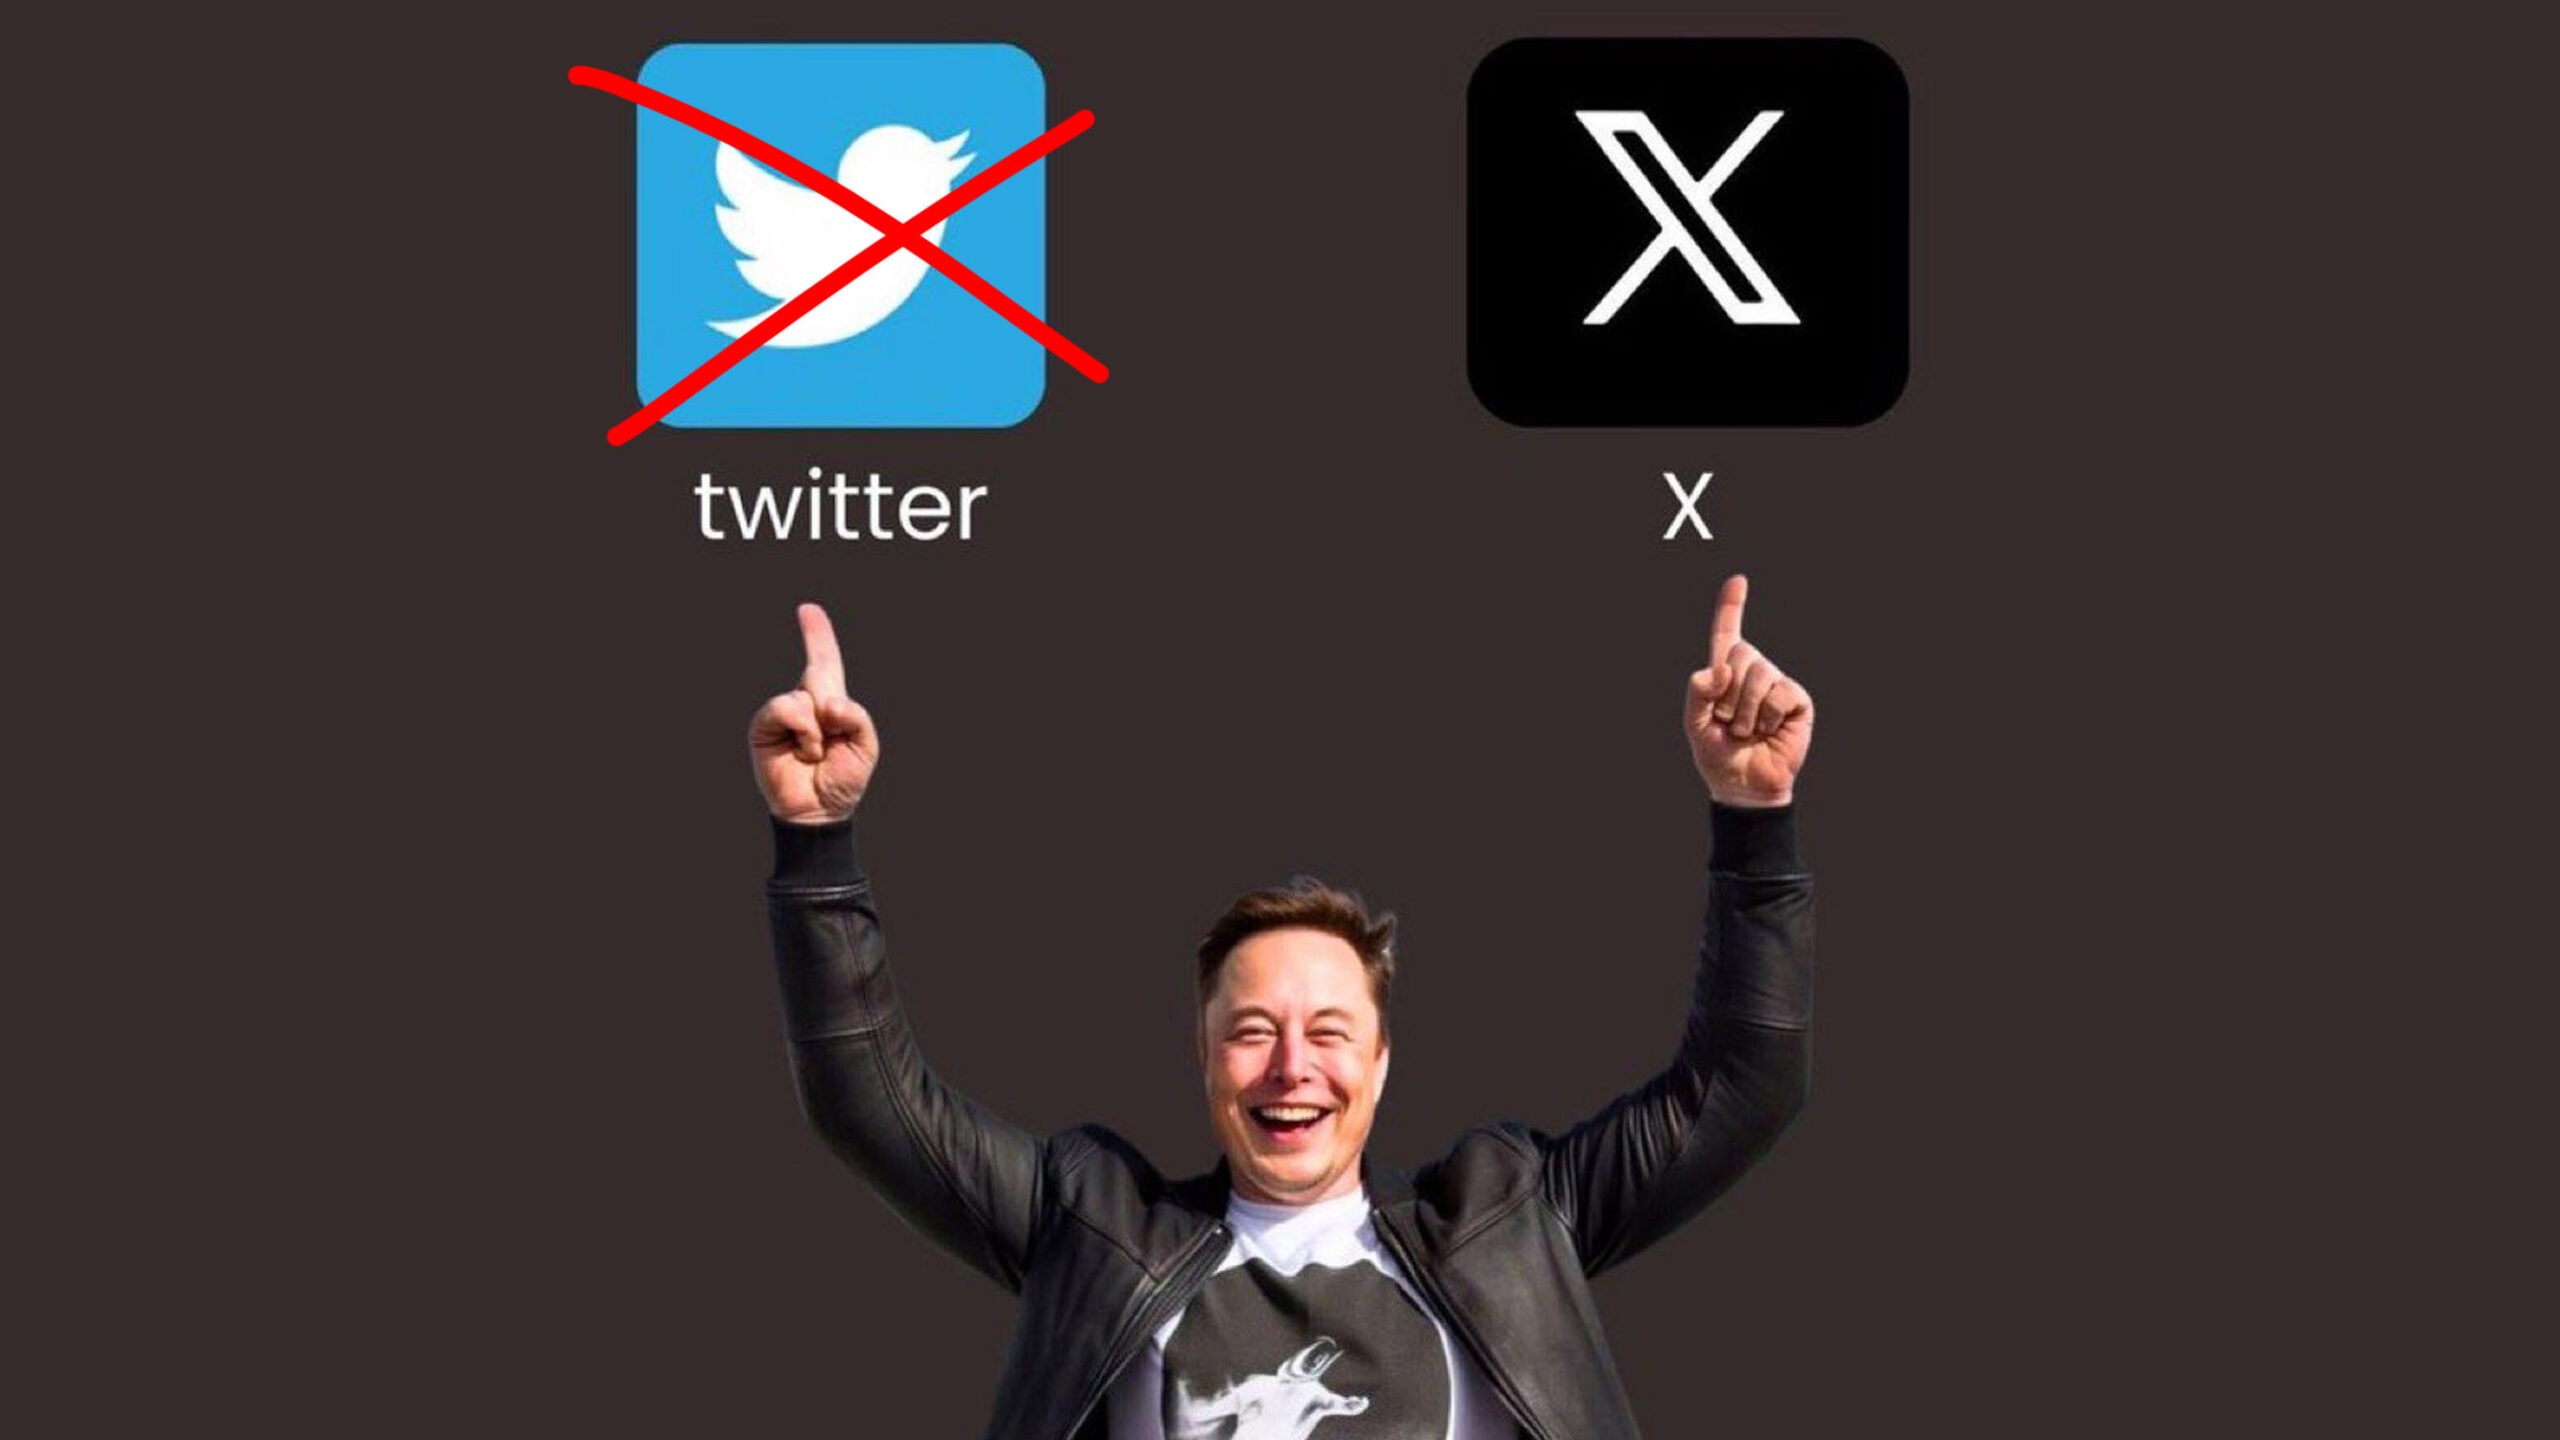 Elon Musk With Raised Arms And Smiling Stands Below Two Icons. The Left Icon Shows The Twitter Logo Crossed Out, And The Right Icon Displays The New Logo Labeled &Quot;X.com.&Quot; With This Change, It'S Clear: Twitter Is Dead.